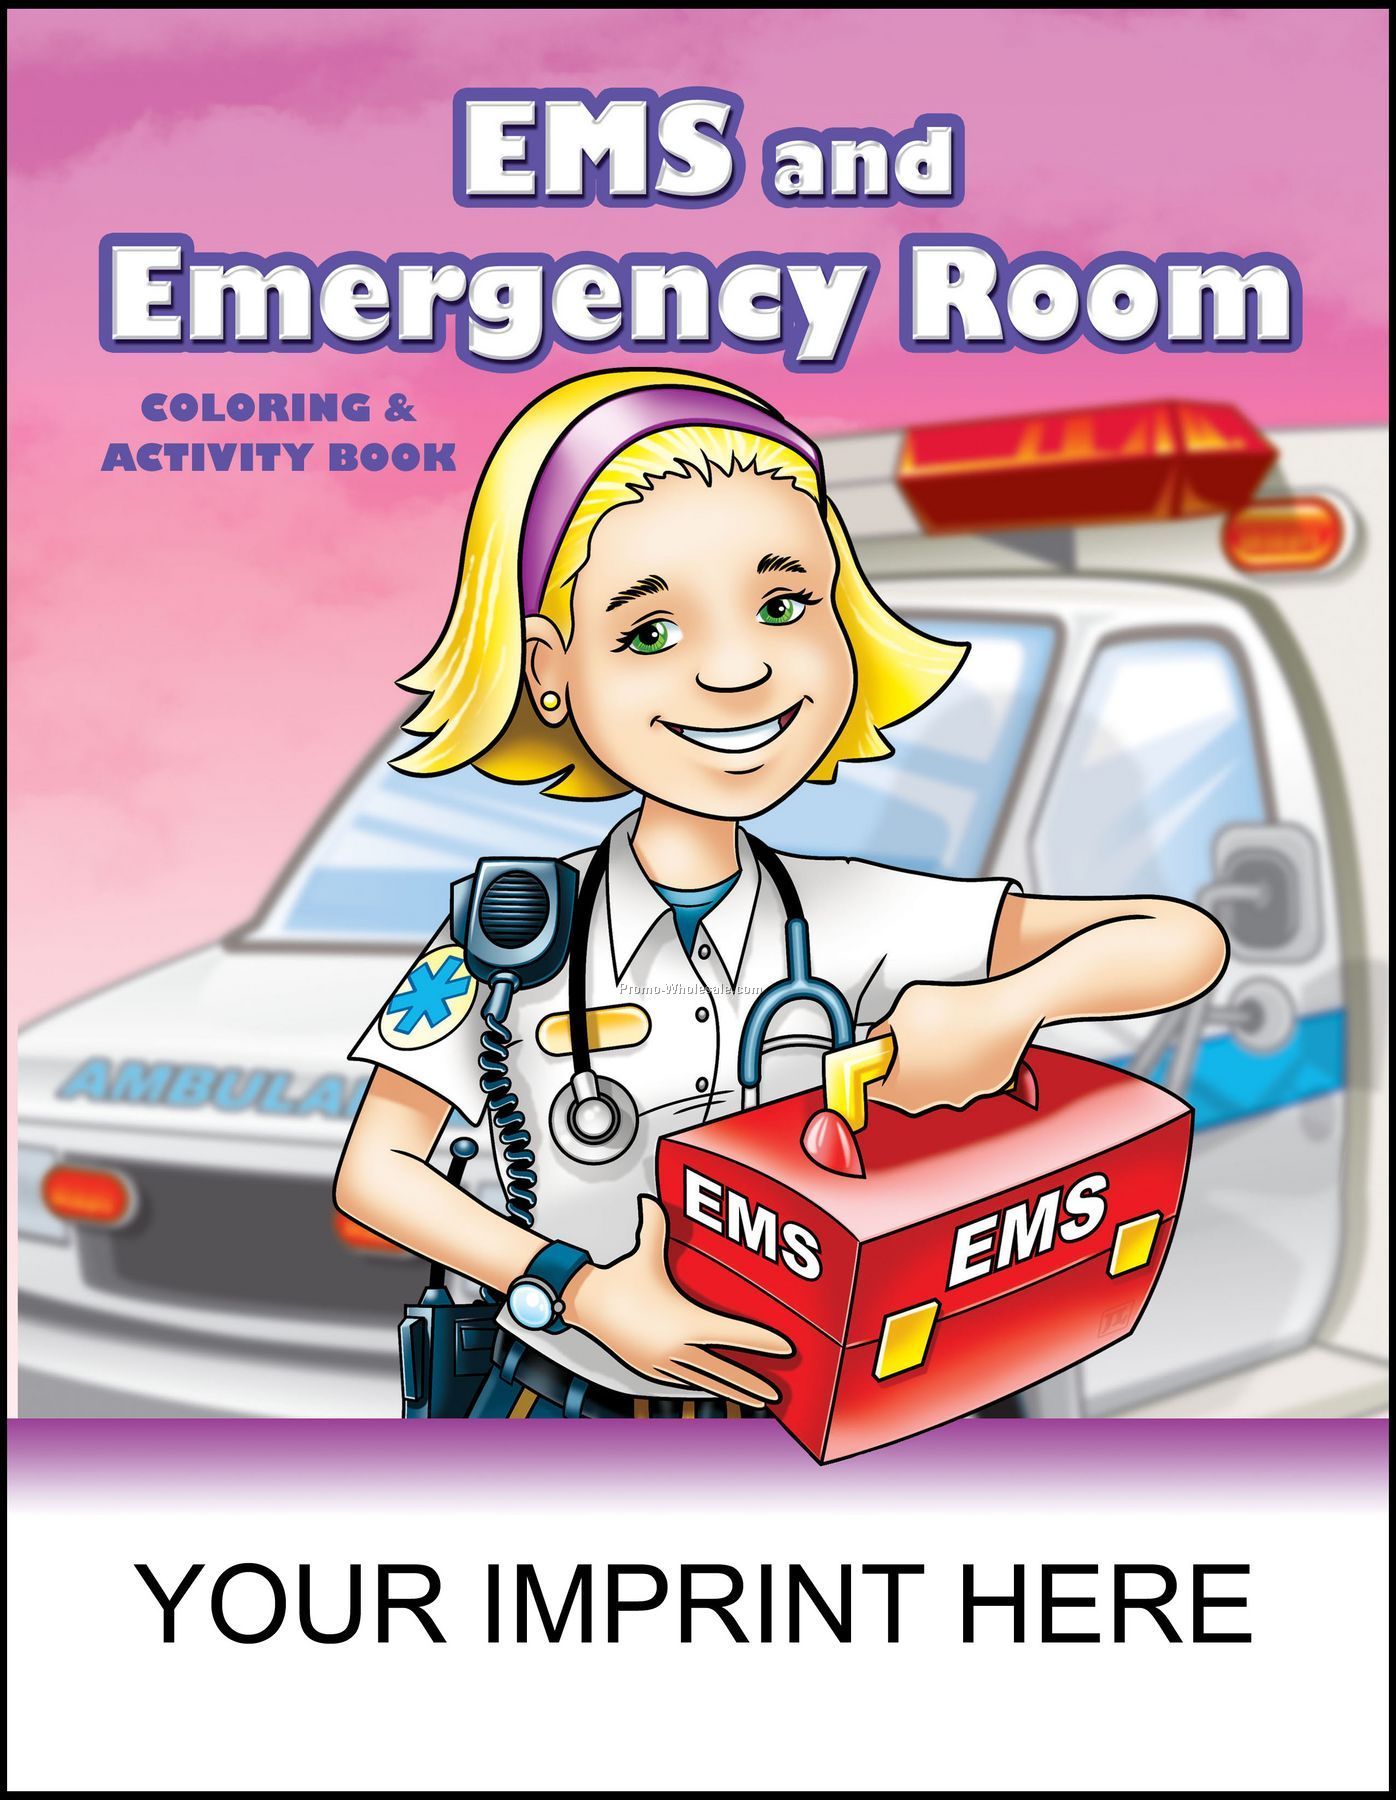 8-3/8"x10-7/8" Ems & Emergency Room Coloring & Activity Book